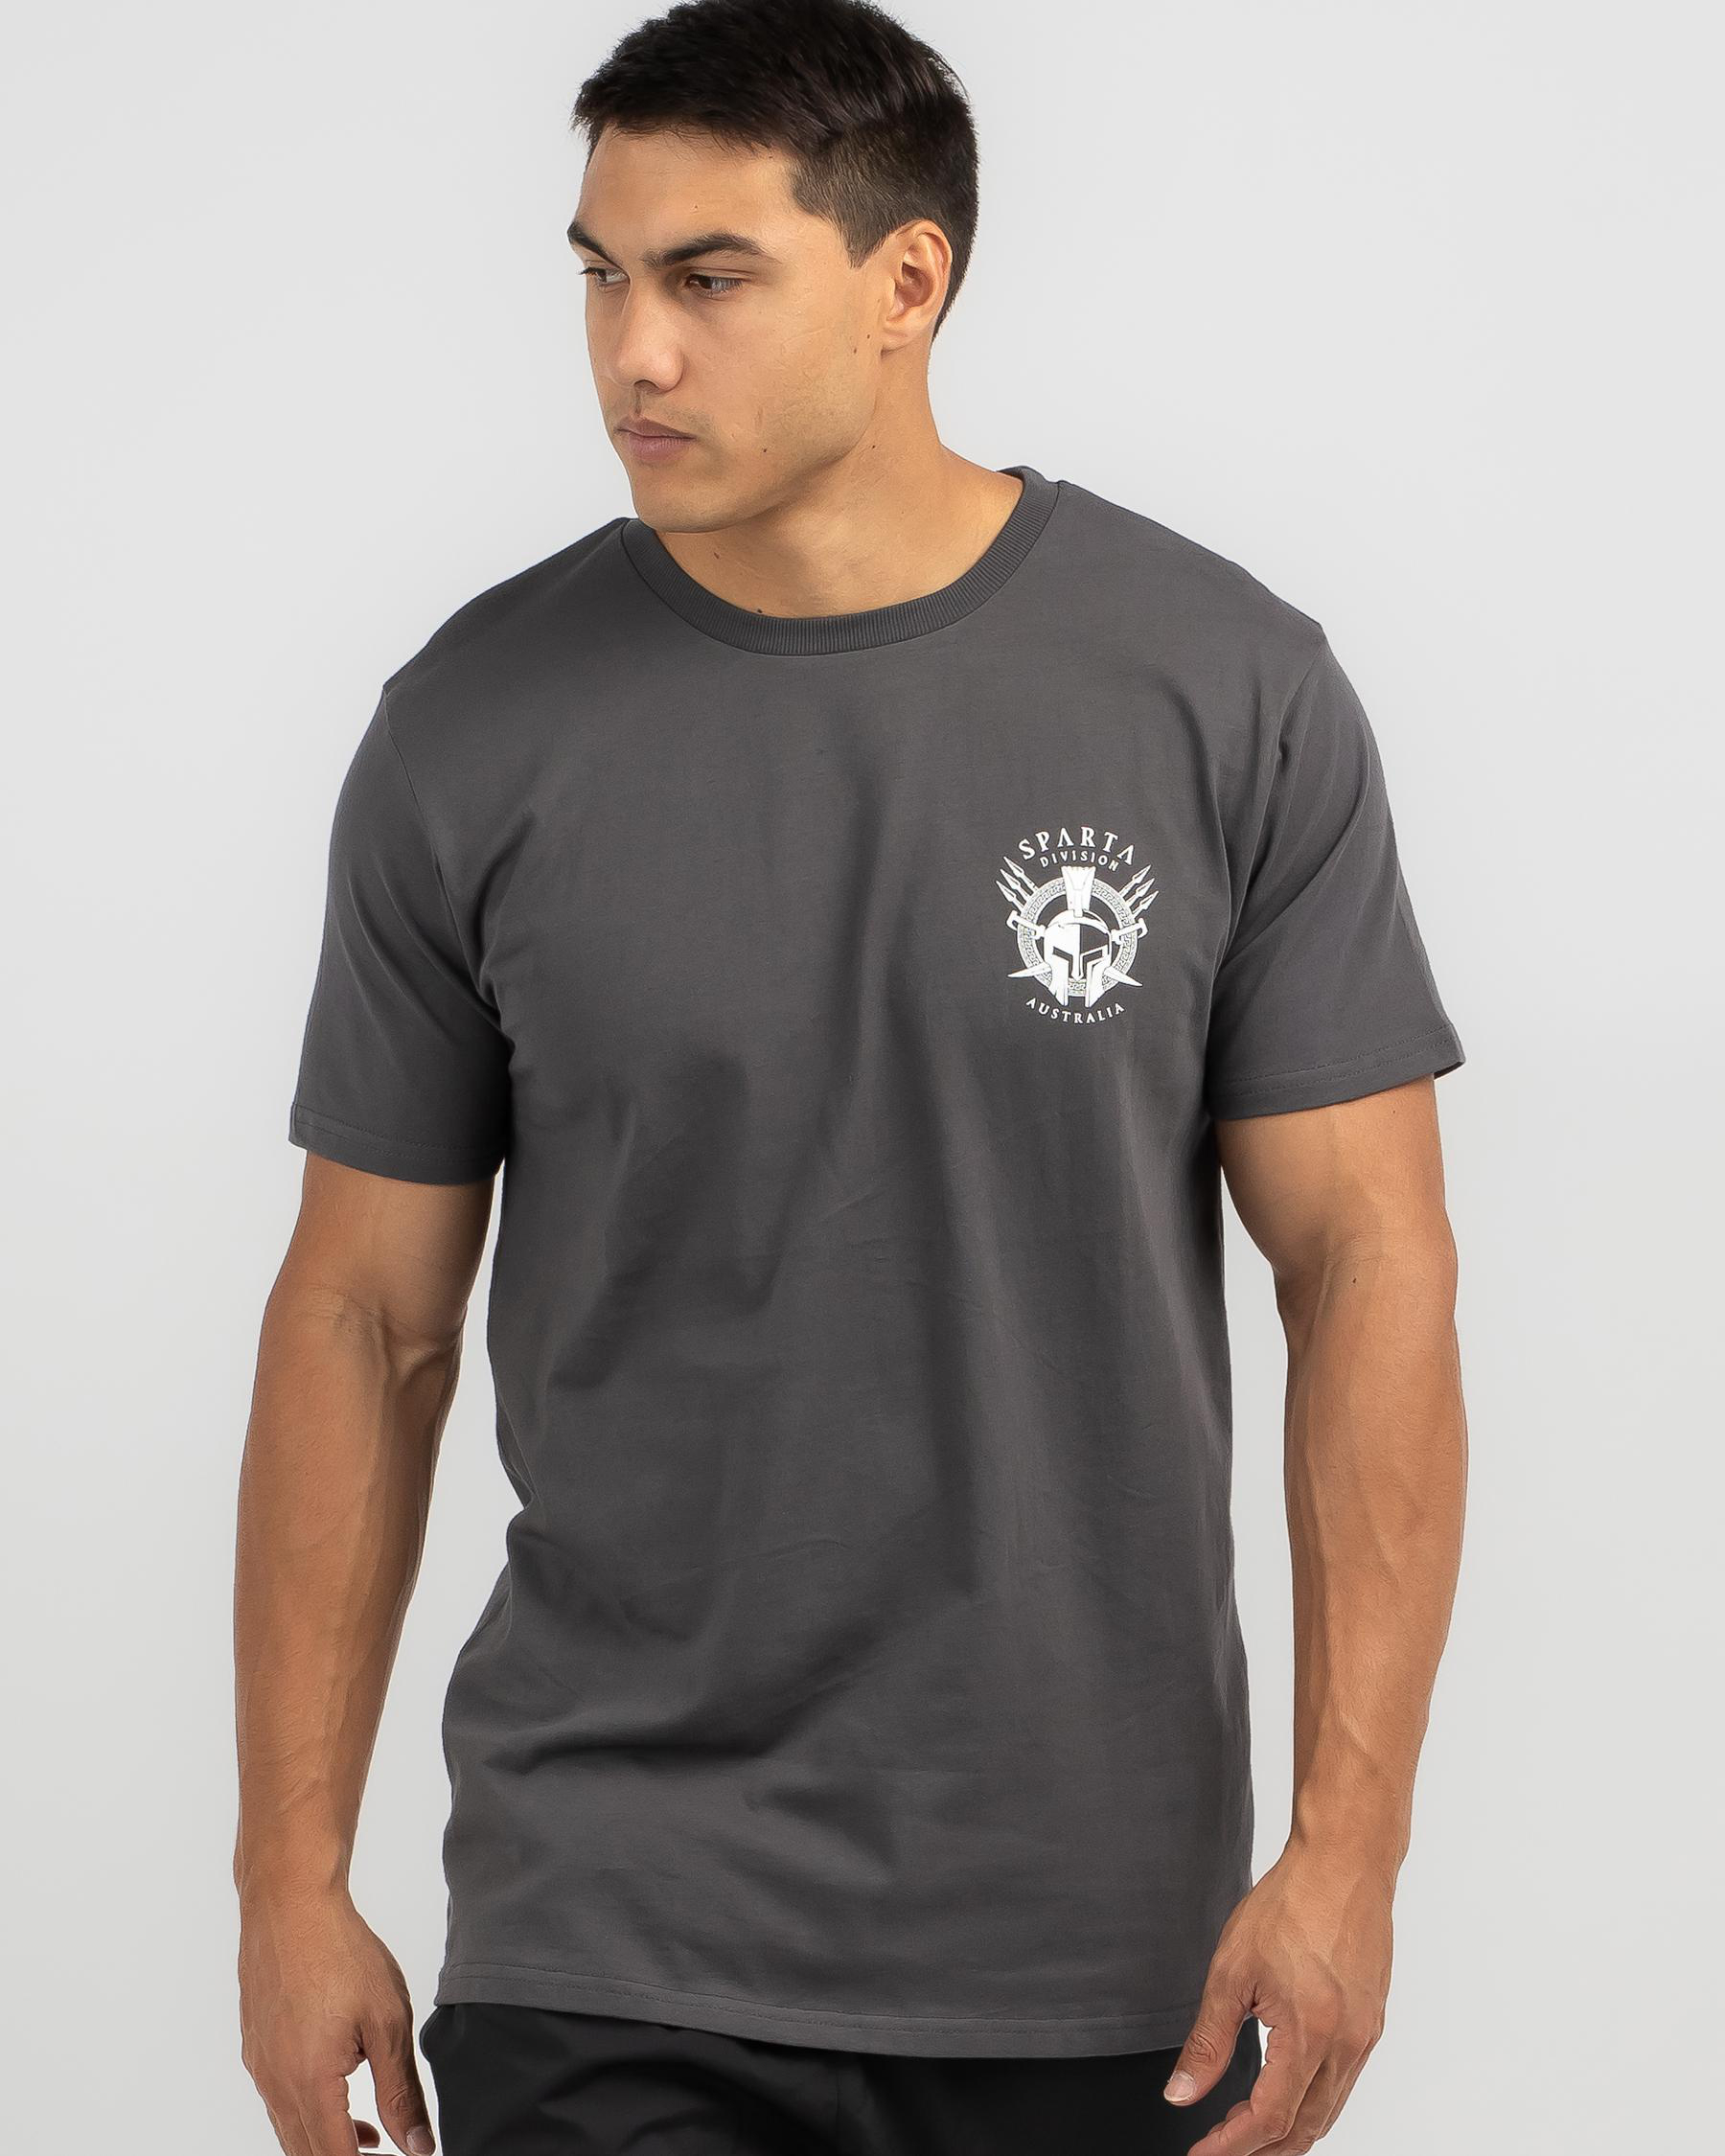 Sparta Legion T-Shirt In Charcoal - Fast Shipping & Easy Returns - City ...